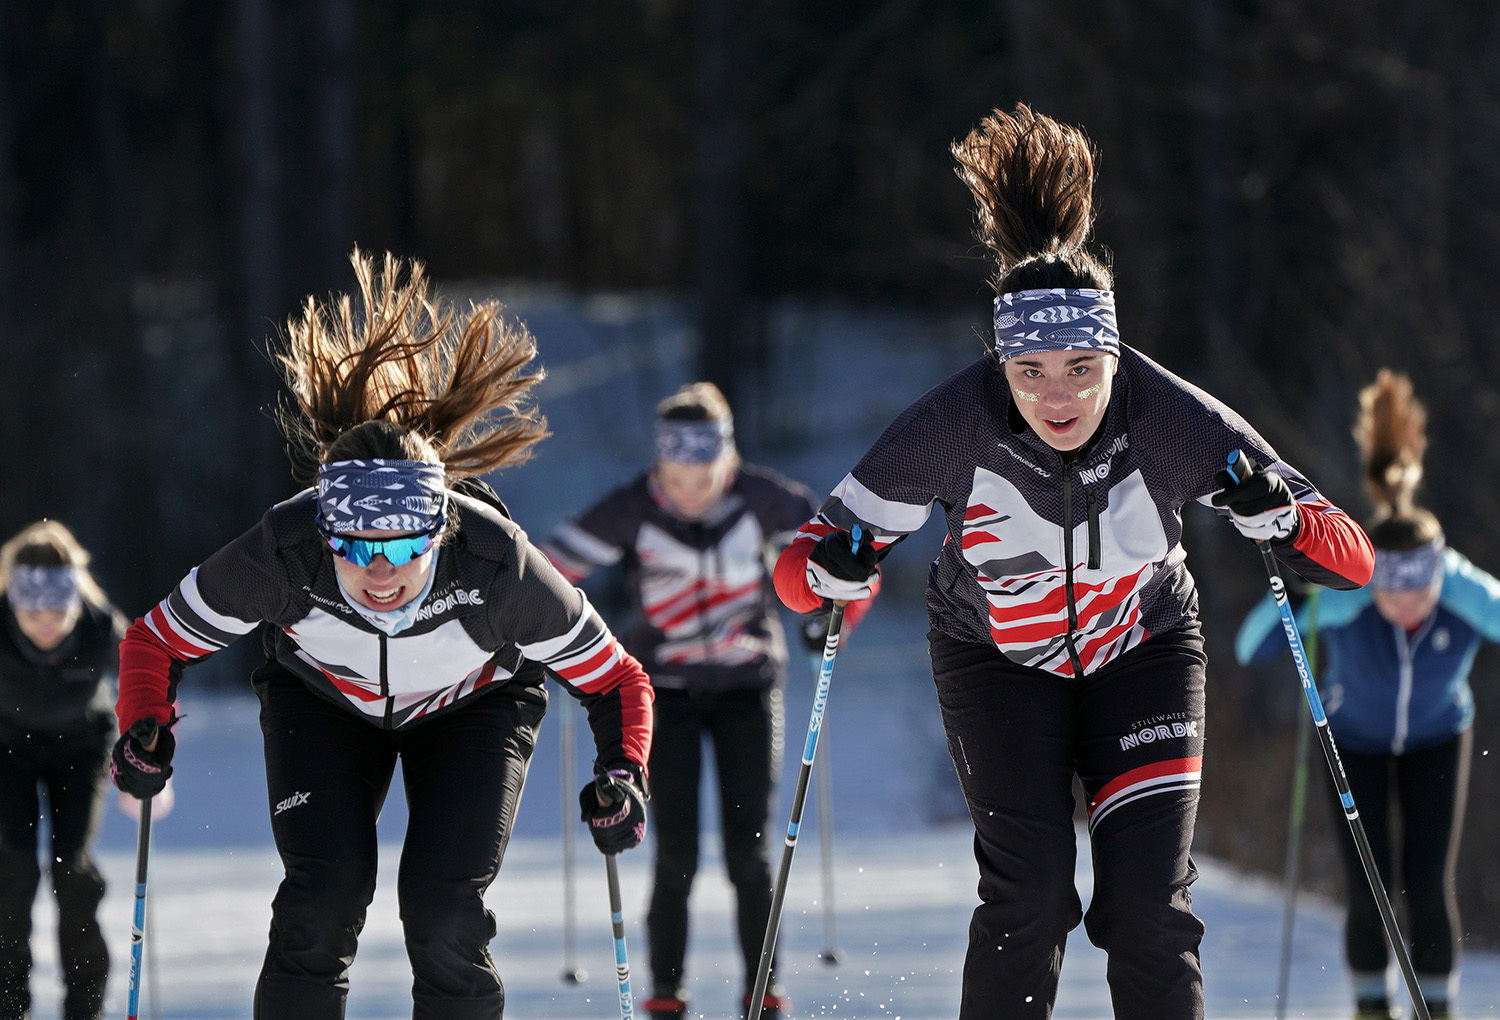 Stillwater High School Nordic team members Libby Tuttle and Louisa Ward going through drills at Lake Elmo Park Reserve Nordic Center. The team remains gaga for its famous alum.